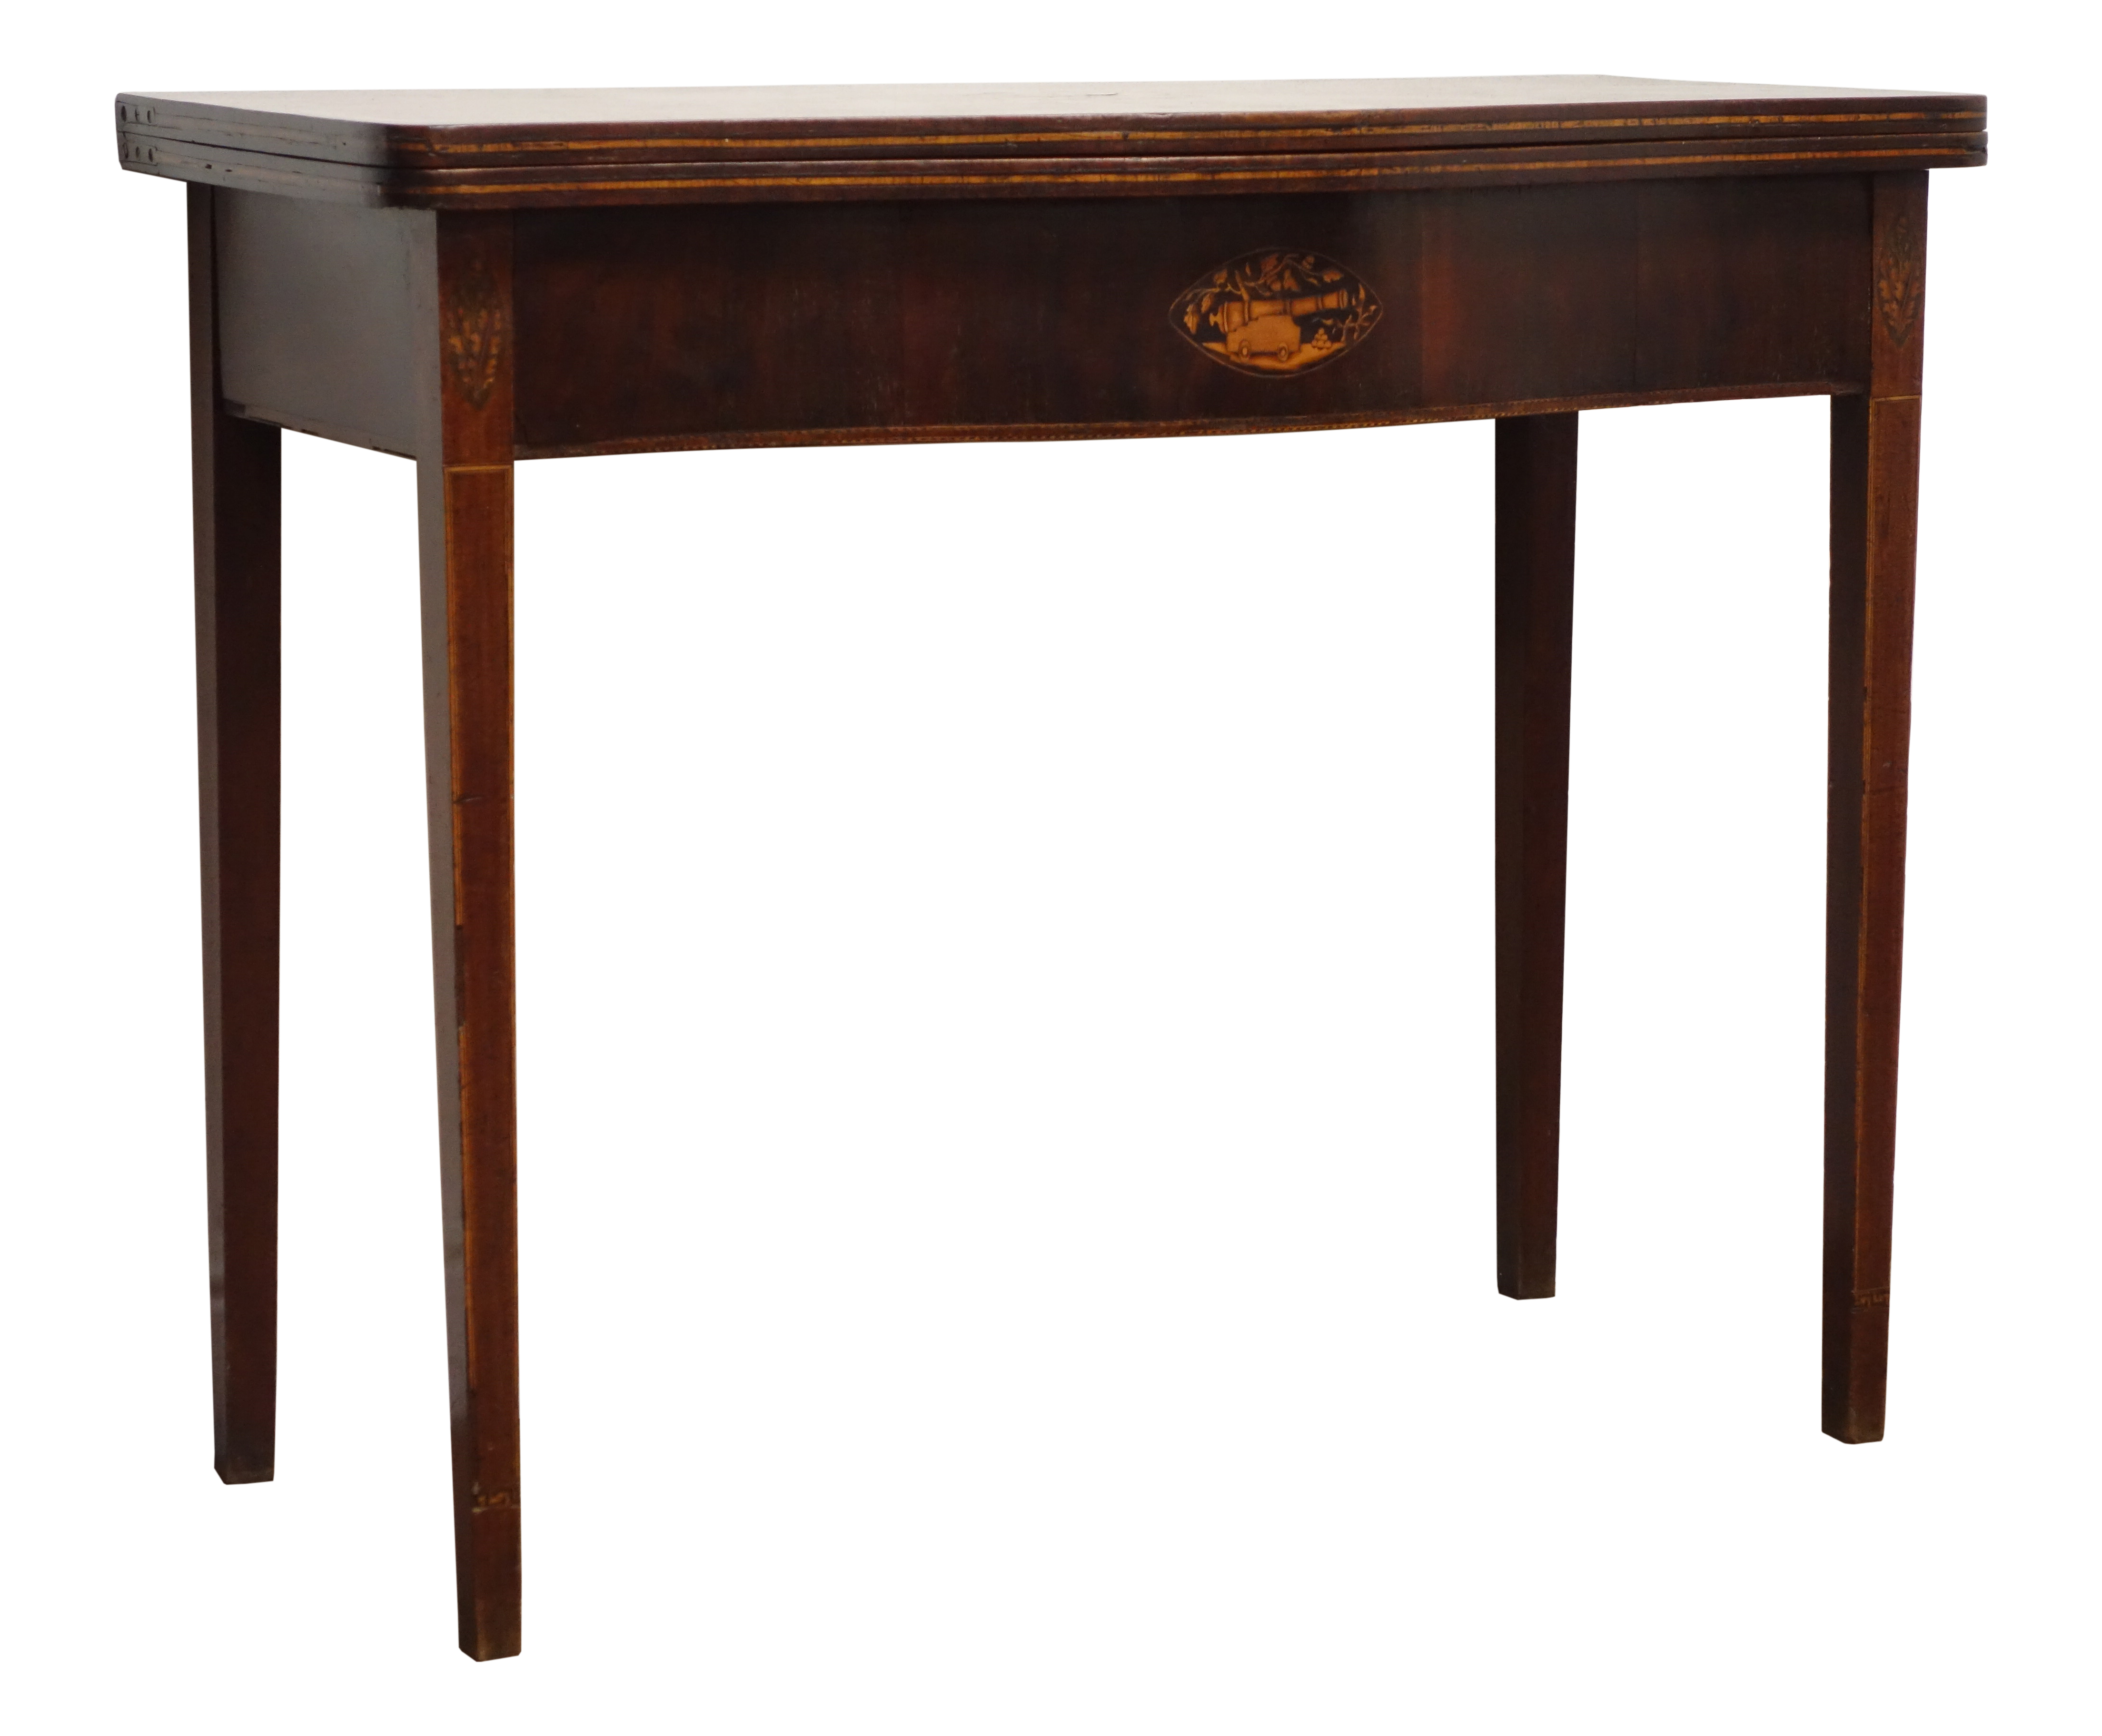 George lll mahogany serpentine front folding tea table, inlaid with specimen wood roundel, - Image 2 of 8